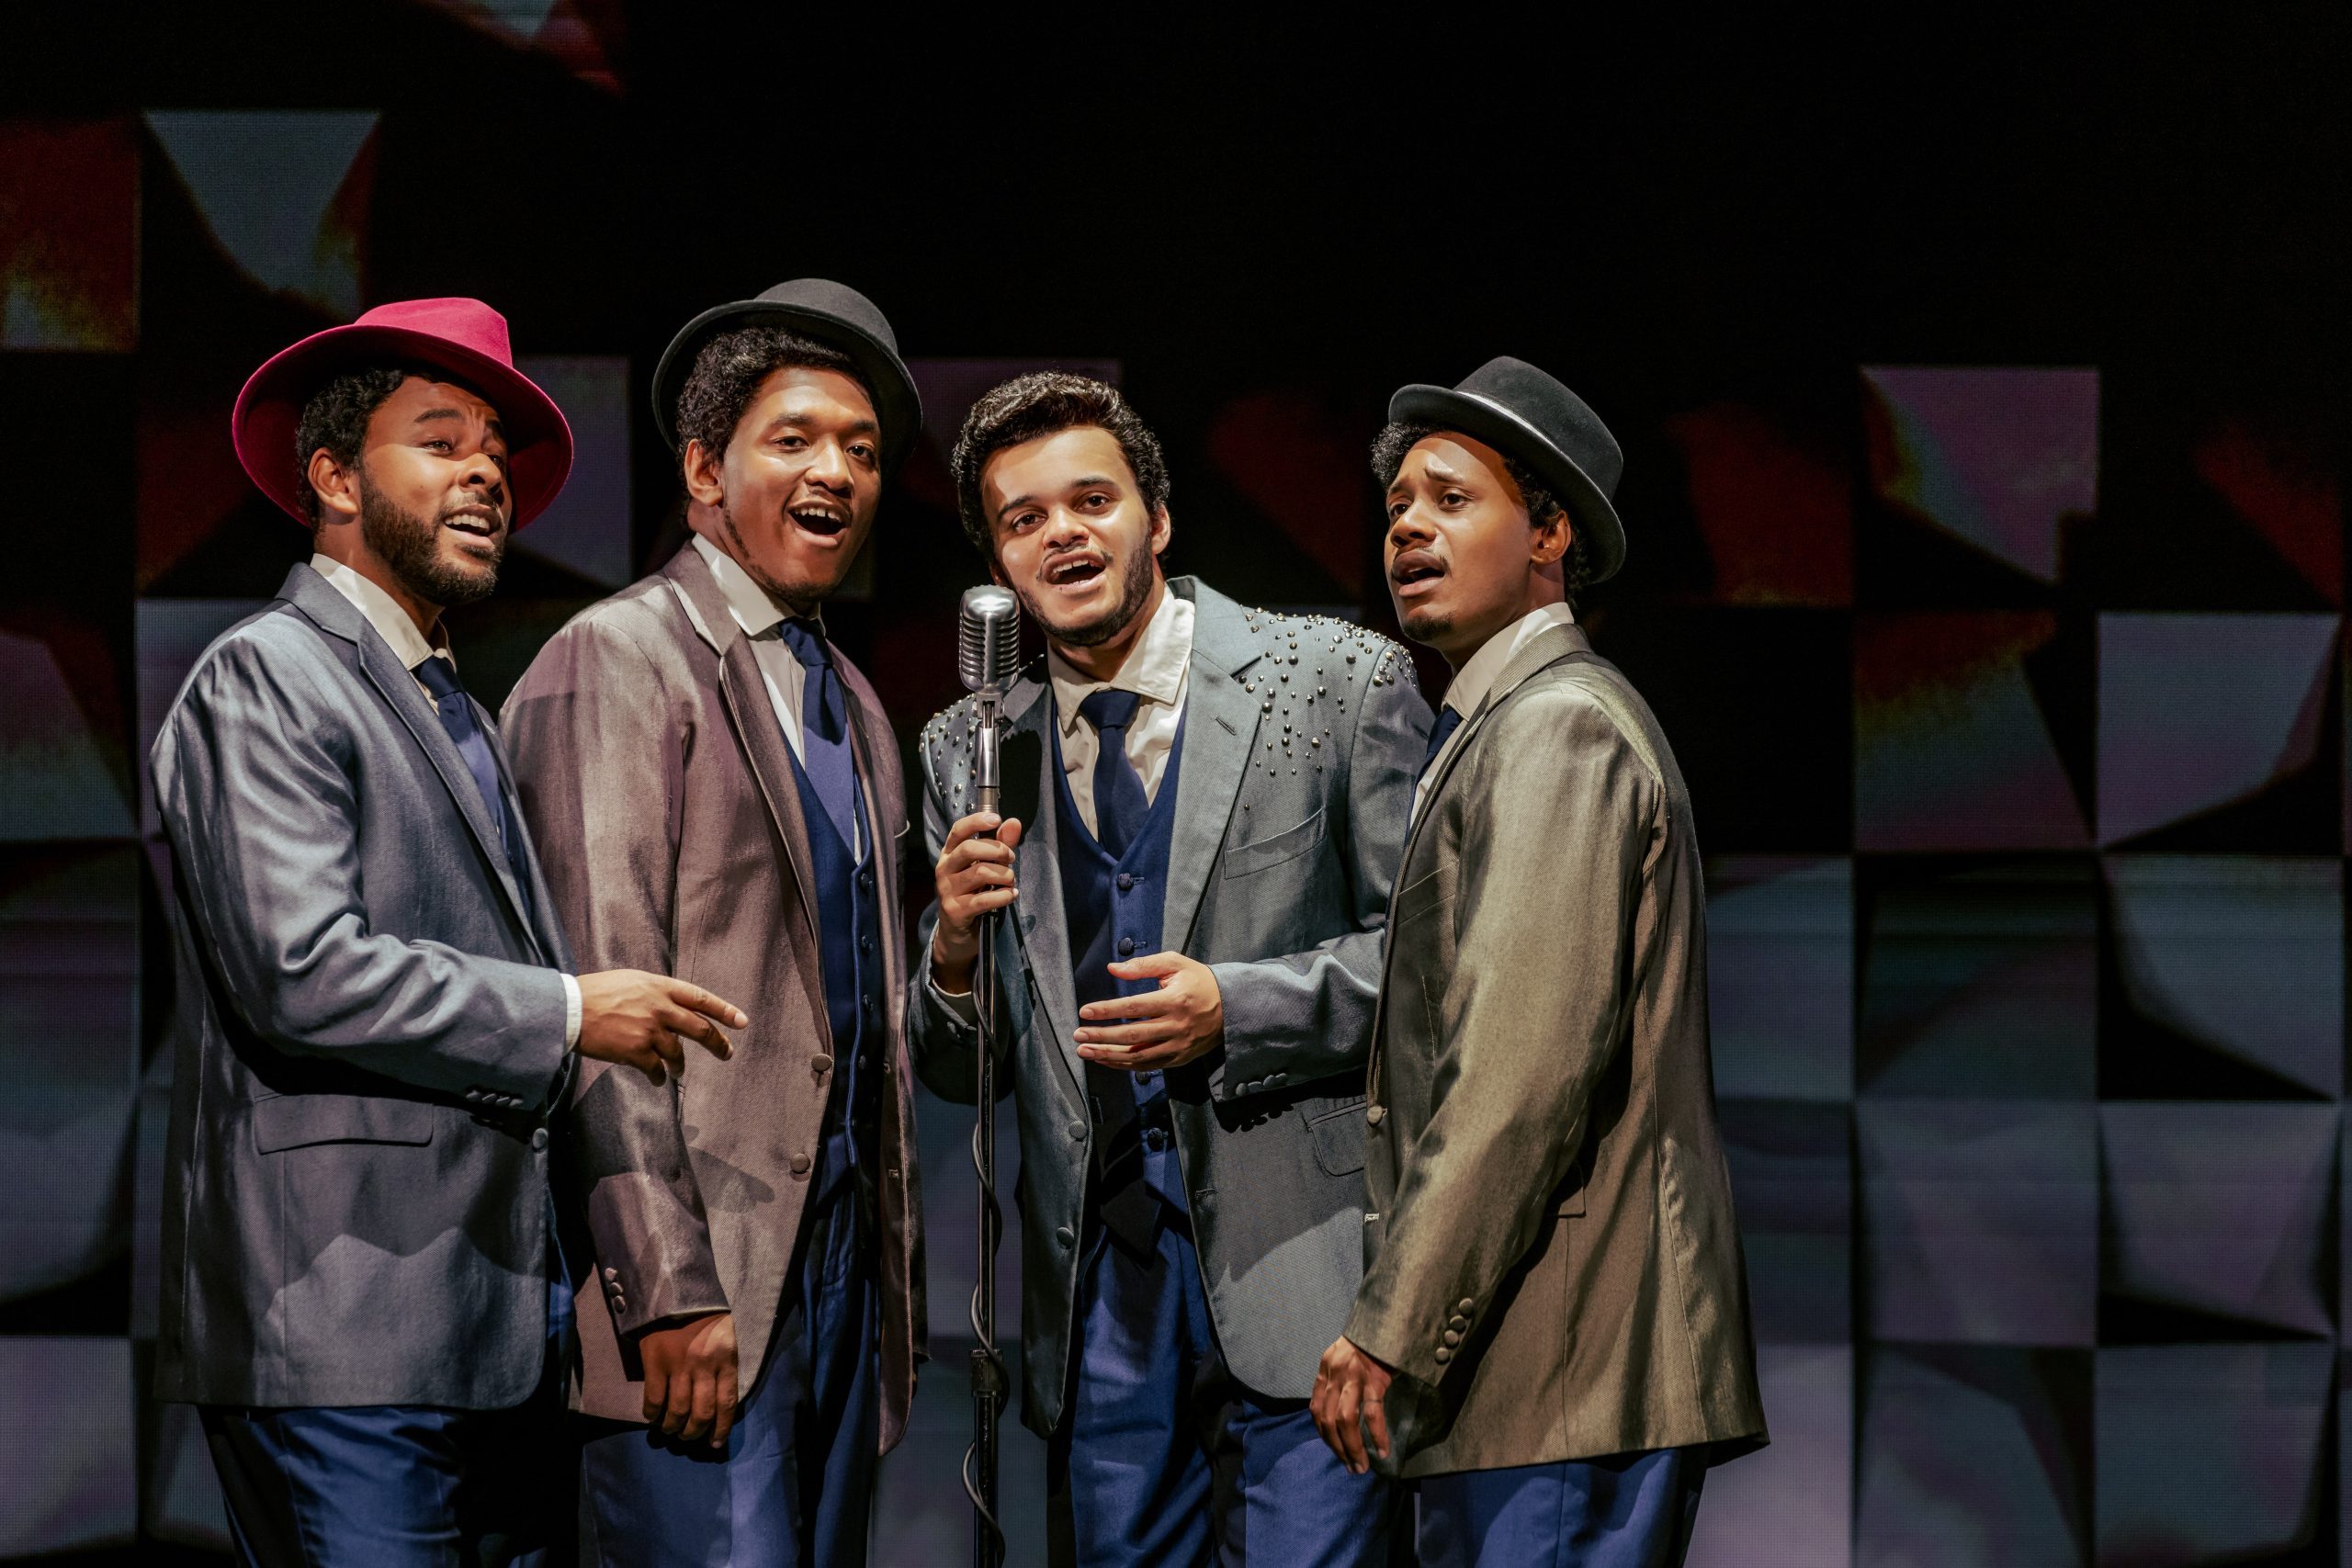 Book The Drifters tickets